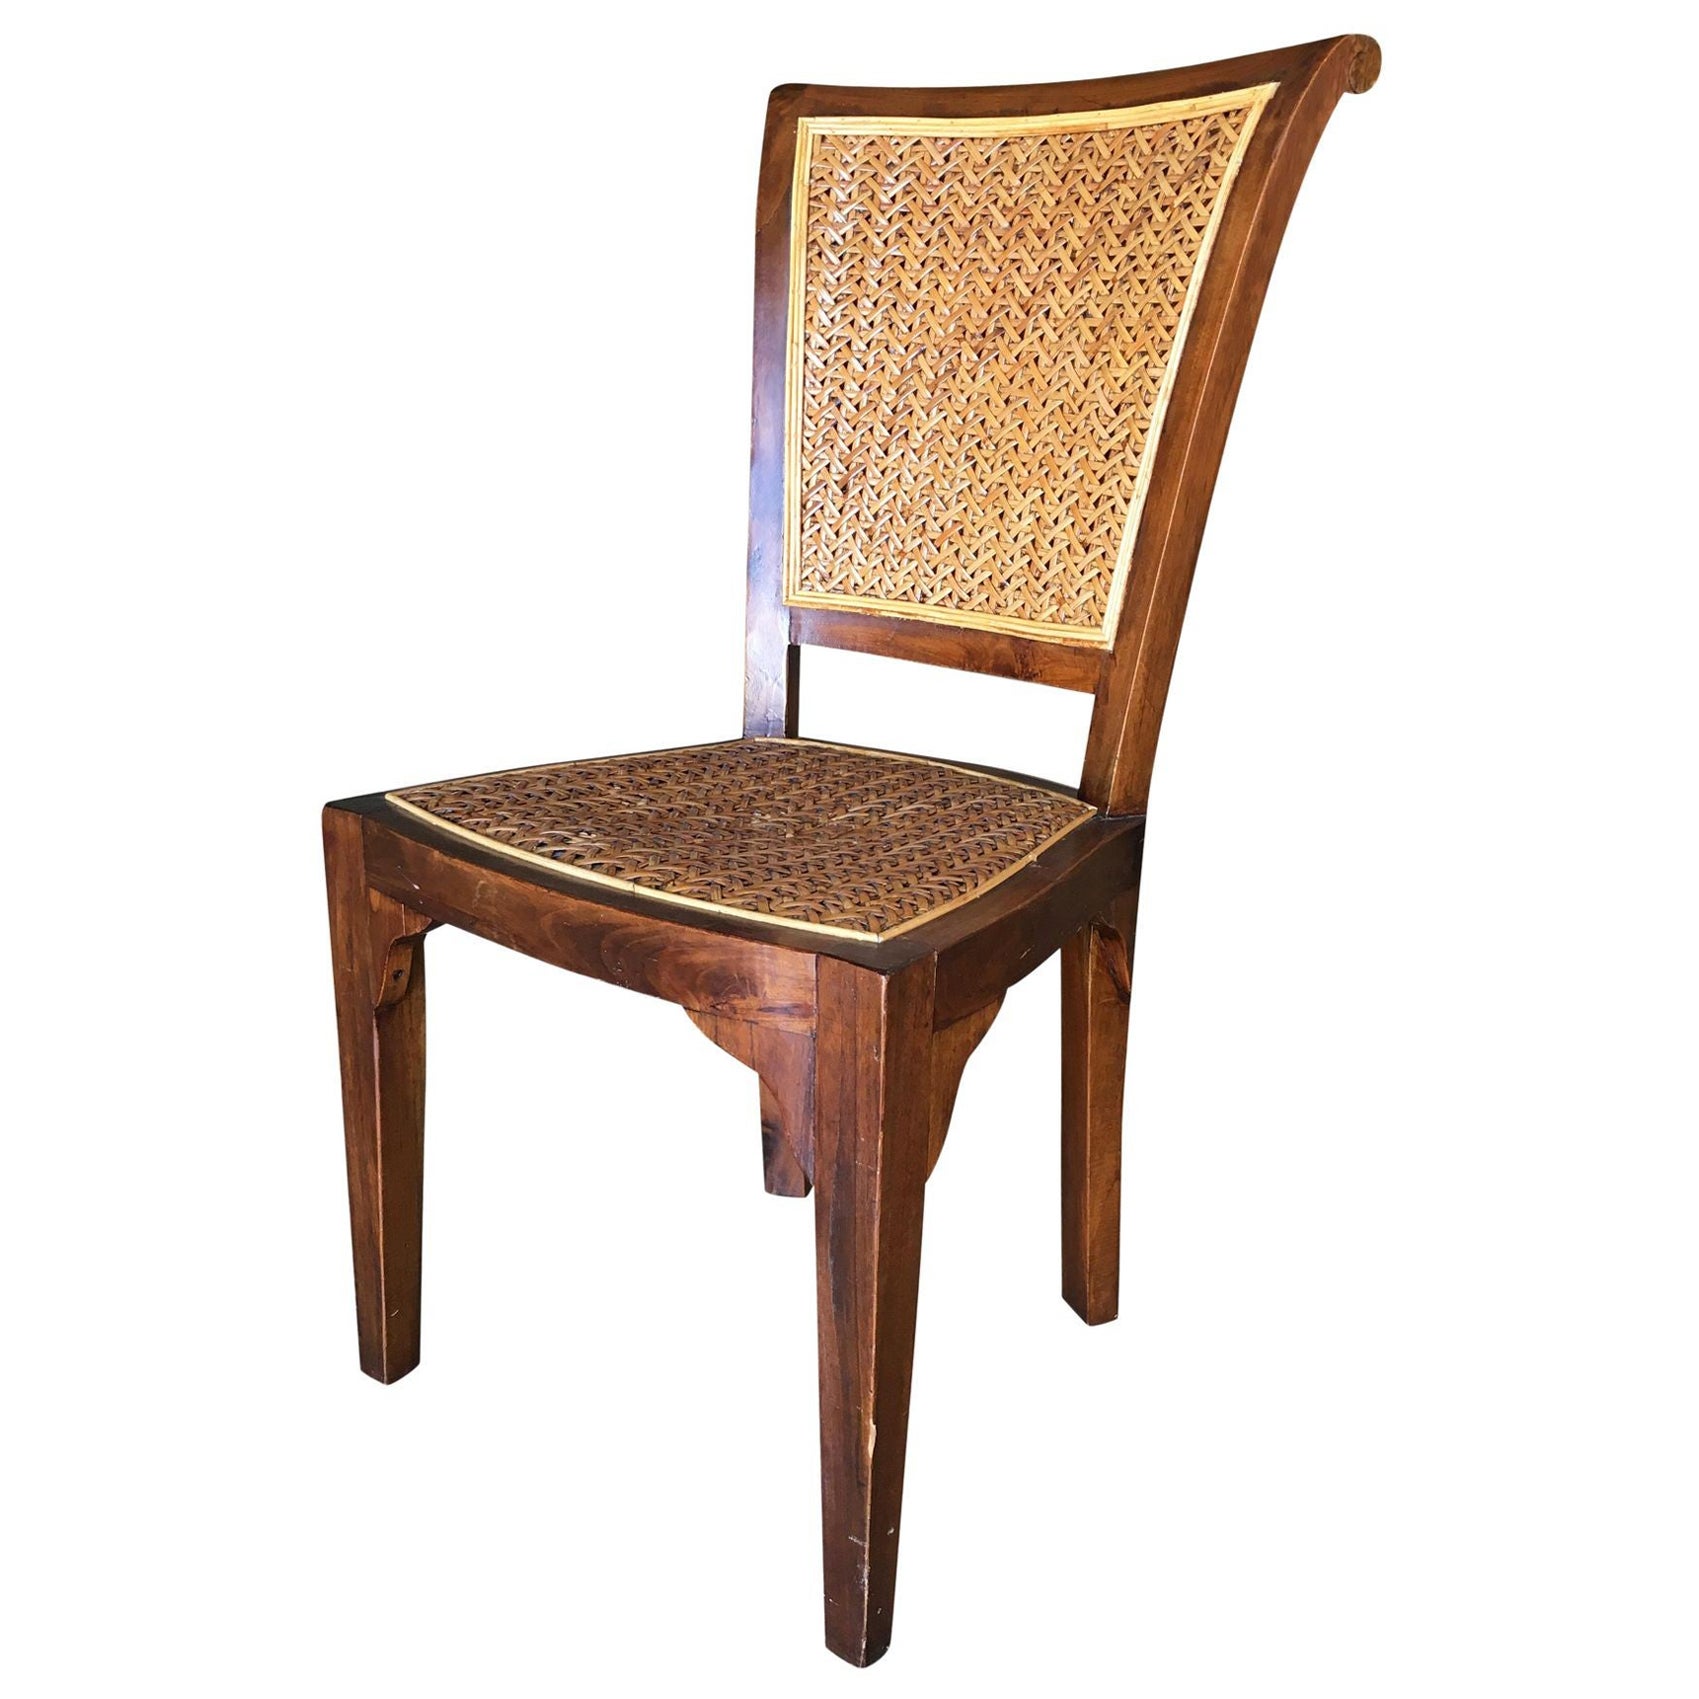 High Style Midcentury Mahogany Dining Chair with Woven Wicker Seat For Sale